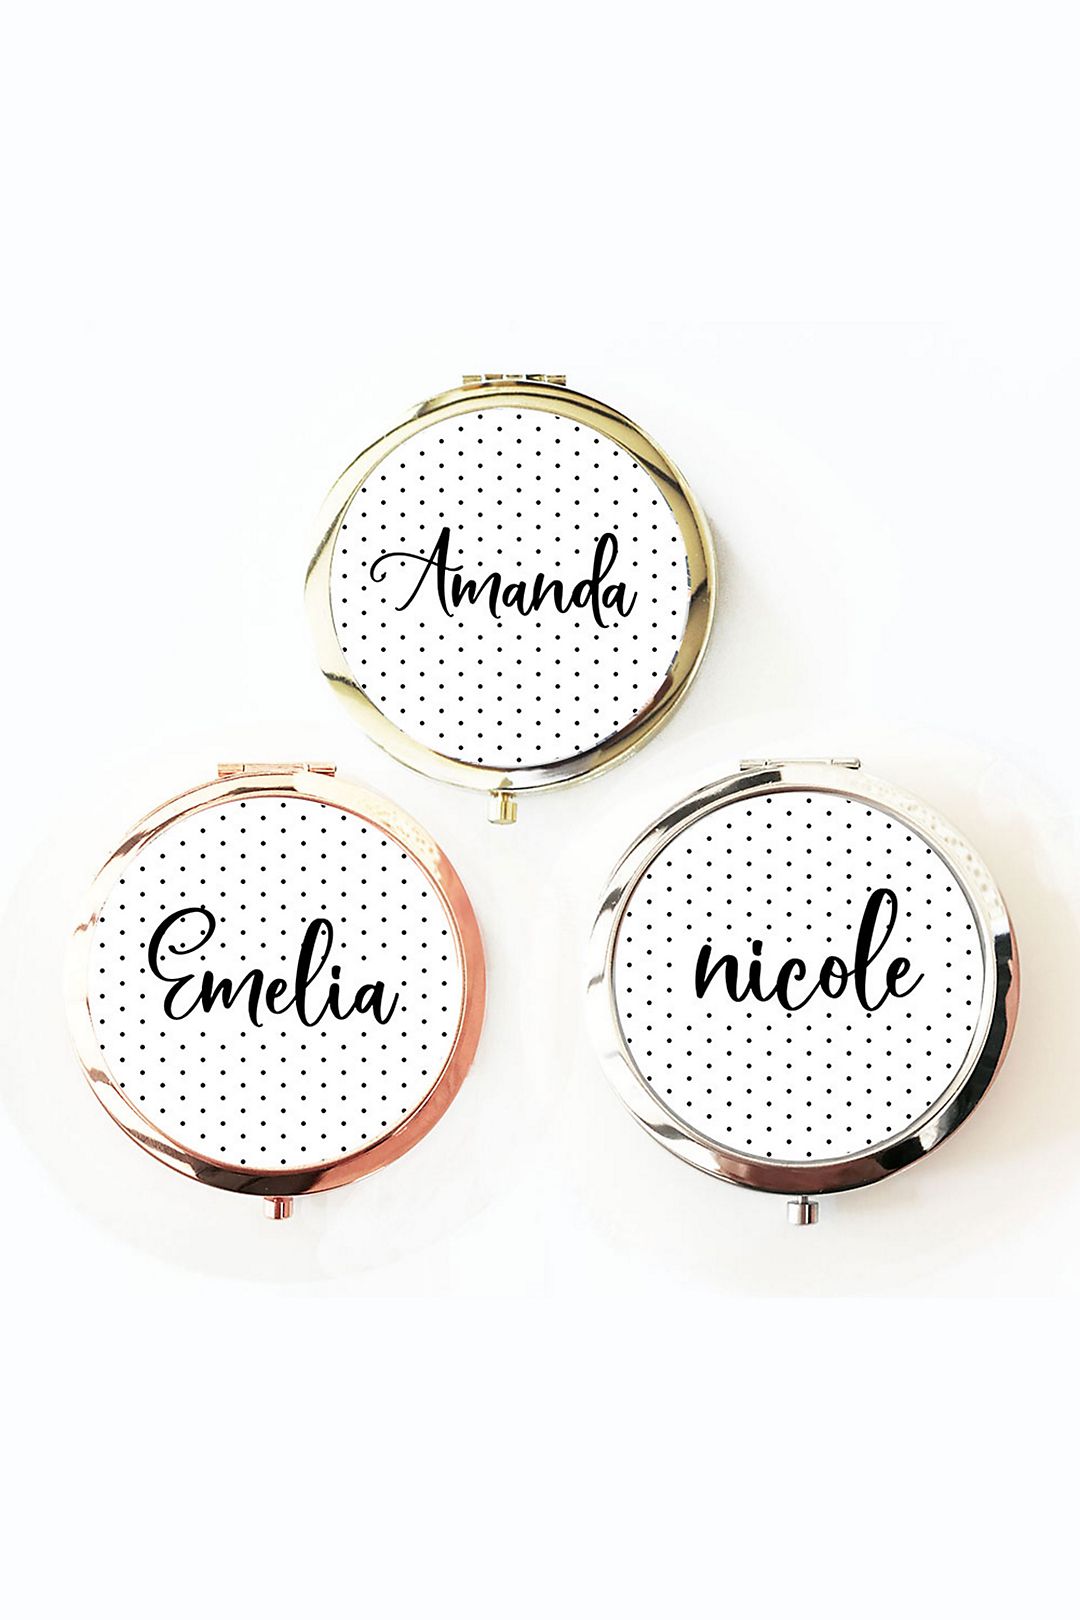 Polka Dot Sky Personalised Rose Gold Round Circle Shape Compact Mirror For Bridesmaid Wedding Favour Any Name & Message Engraved 